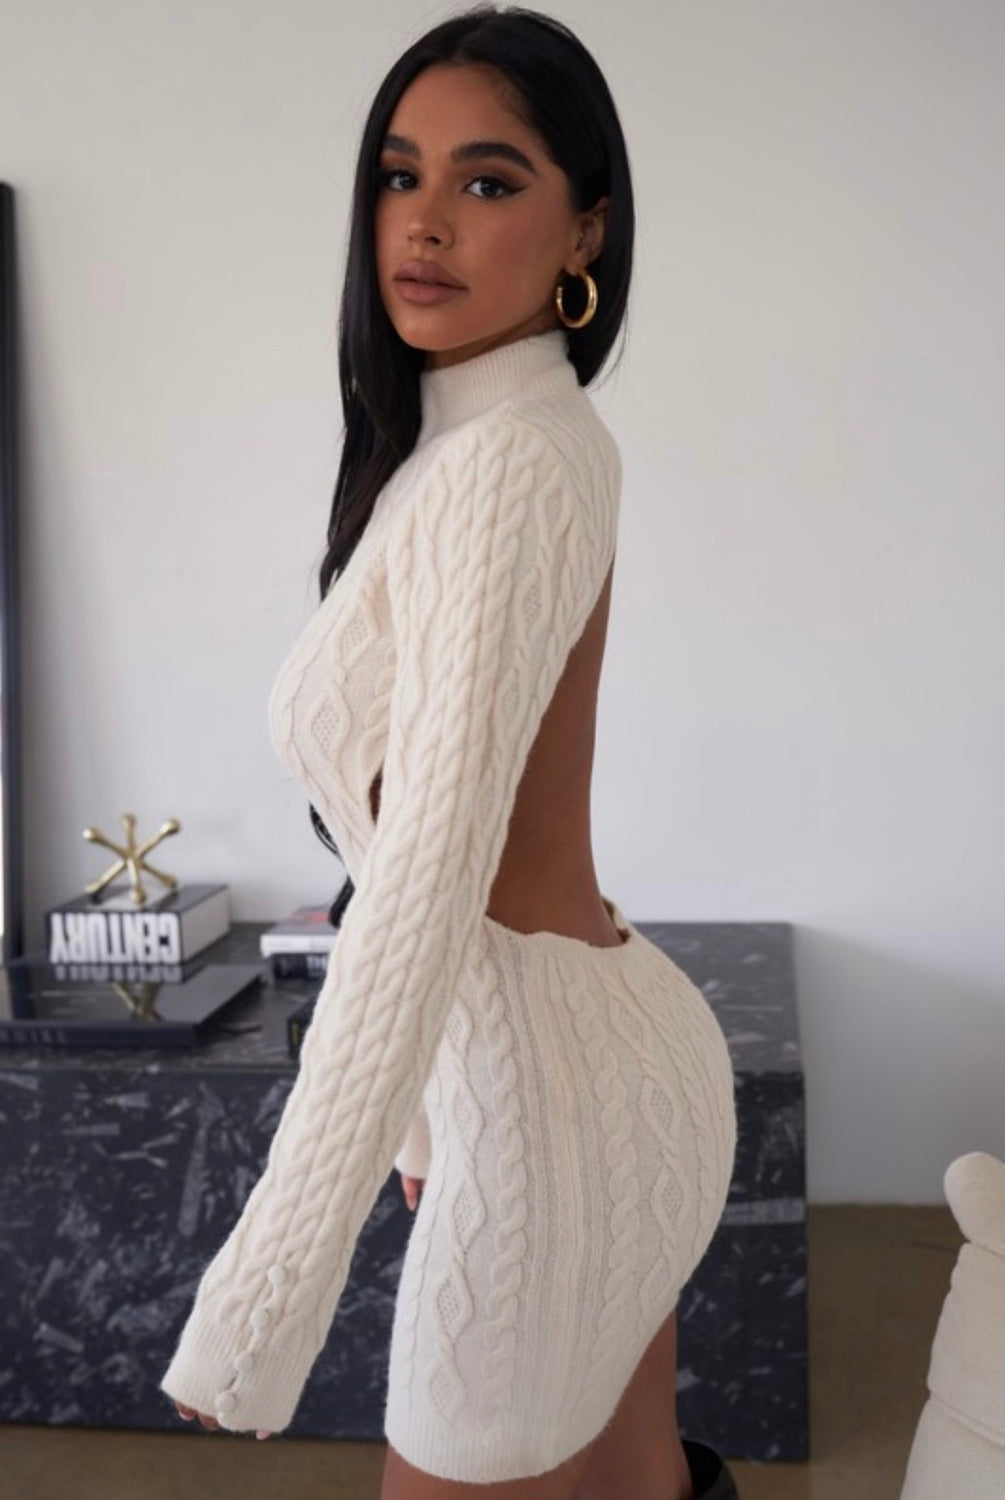 Got Your Back Sweater Dress - Ivory